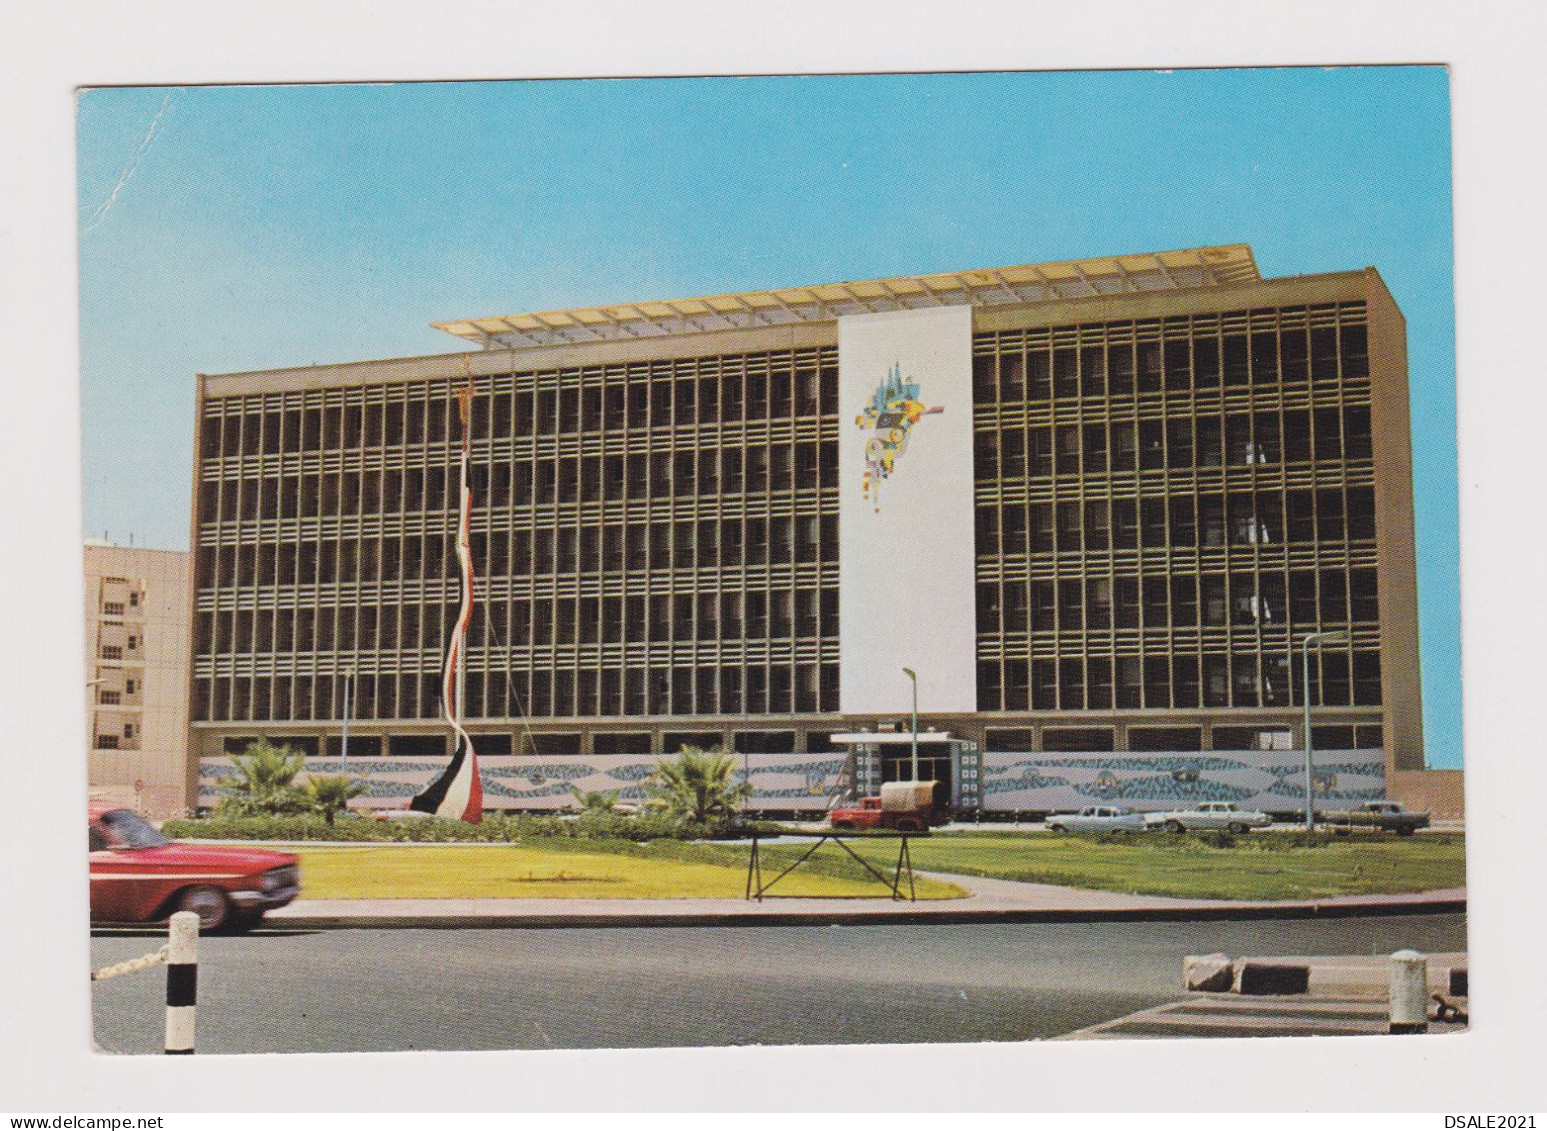 KUWAIT Publishing And Printing Ministry Building, Old Car View, Vintage 1960s Photo Postcard RPPc AK (738) - Kuwait